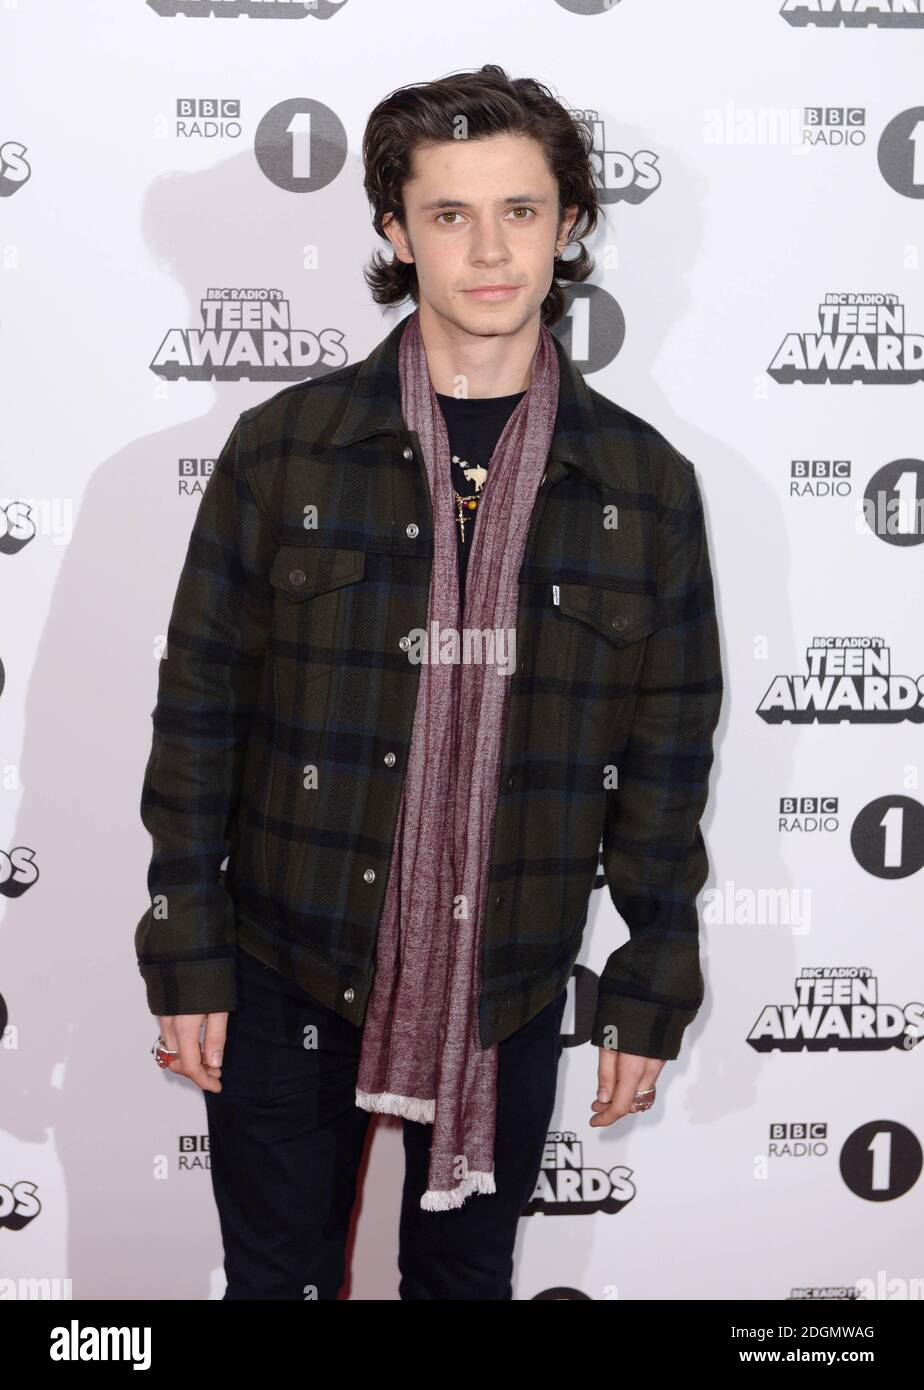 Cel Spellman arriving at the BBC Radio 1 Teen Awards, held at the SSE  Wembley Arena, London. Picture date: Sunday, 23 October, 2016. Photo credit  should: Doug PetersEMPICS Entertainment Stock Photo - Alamy